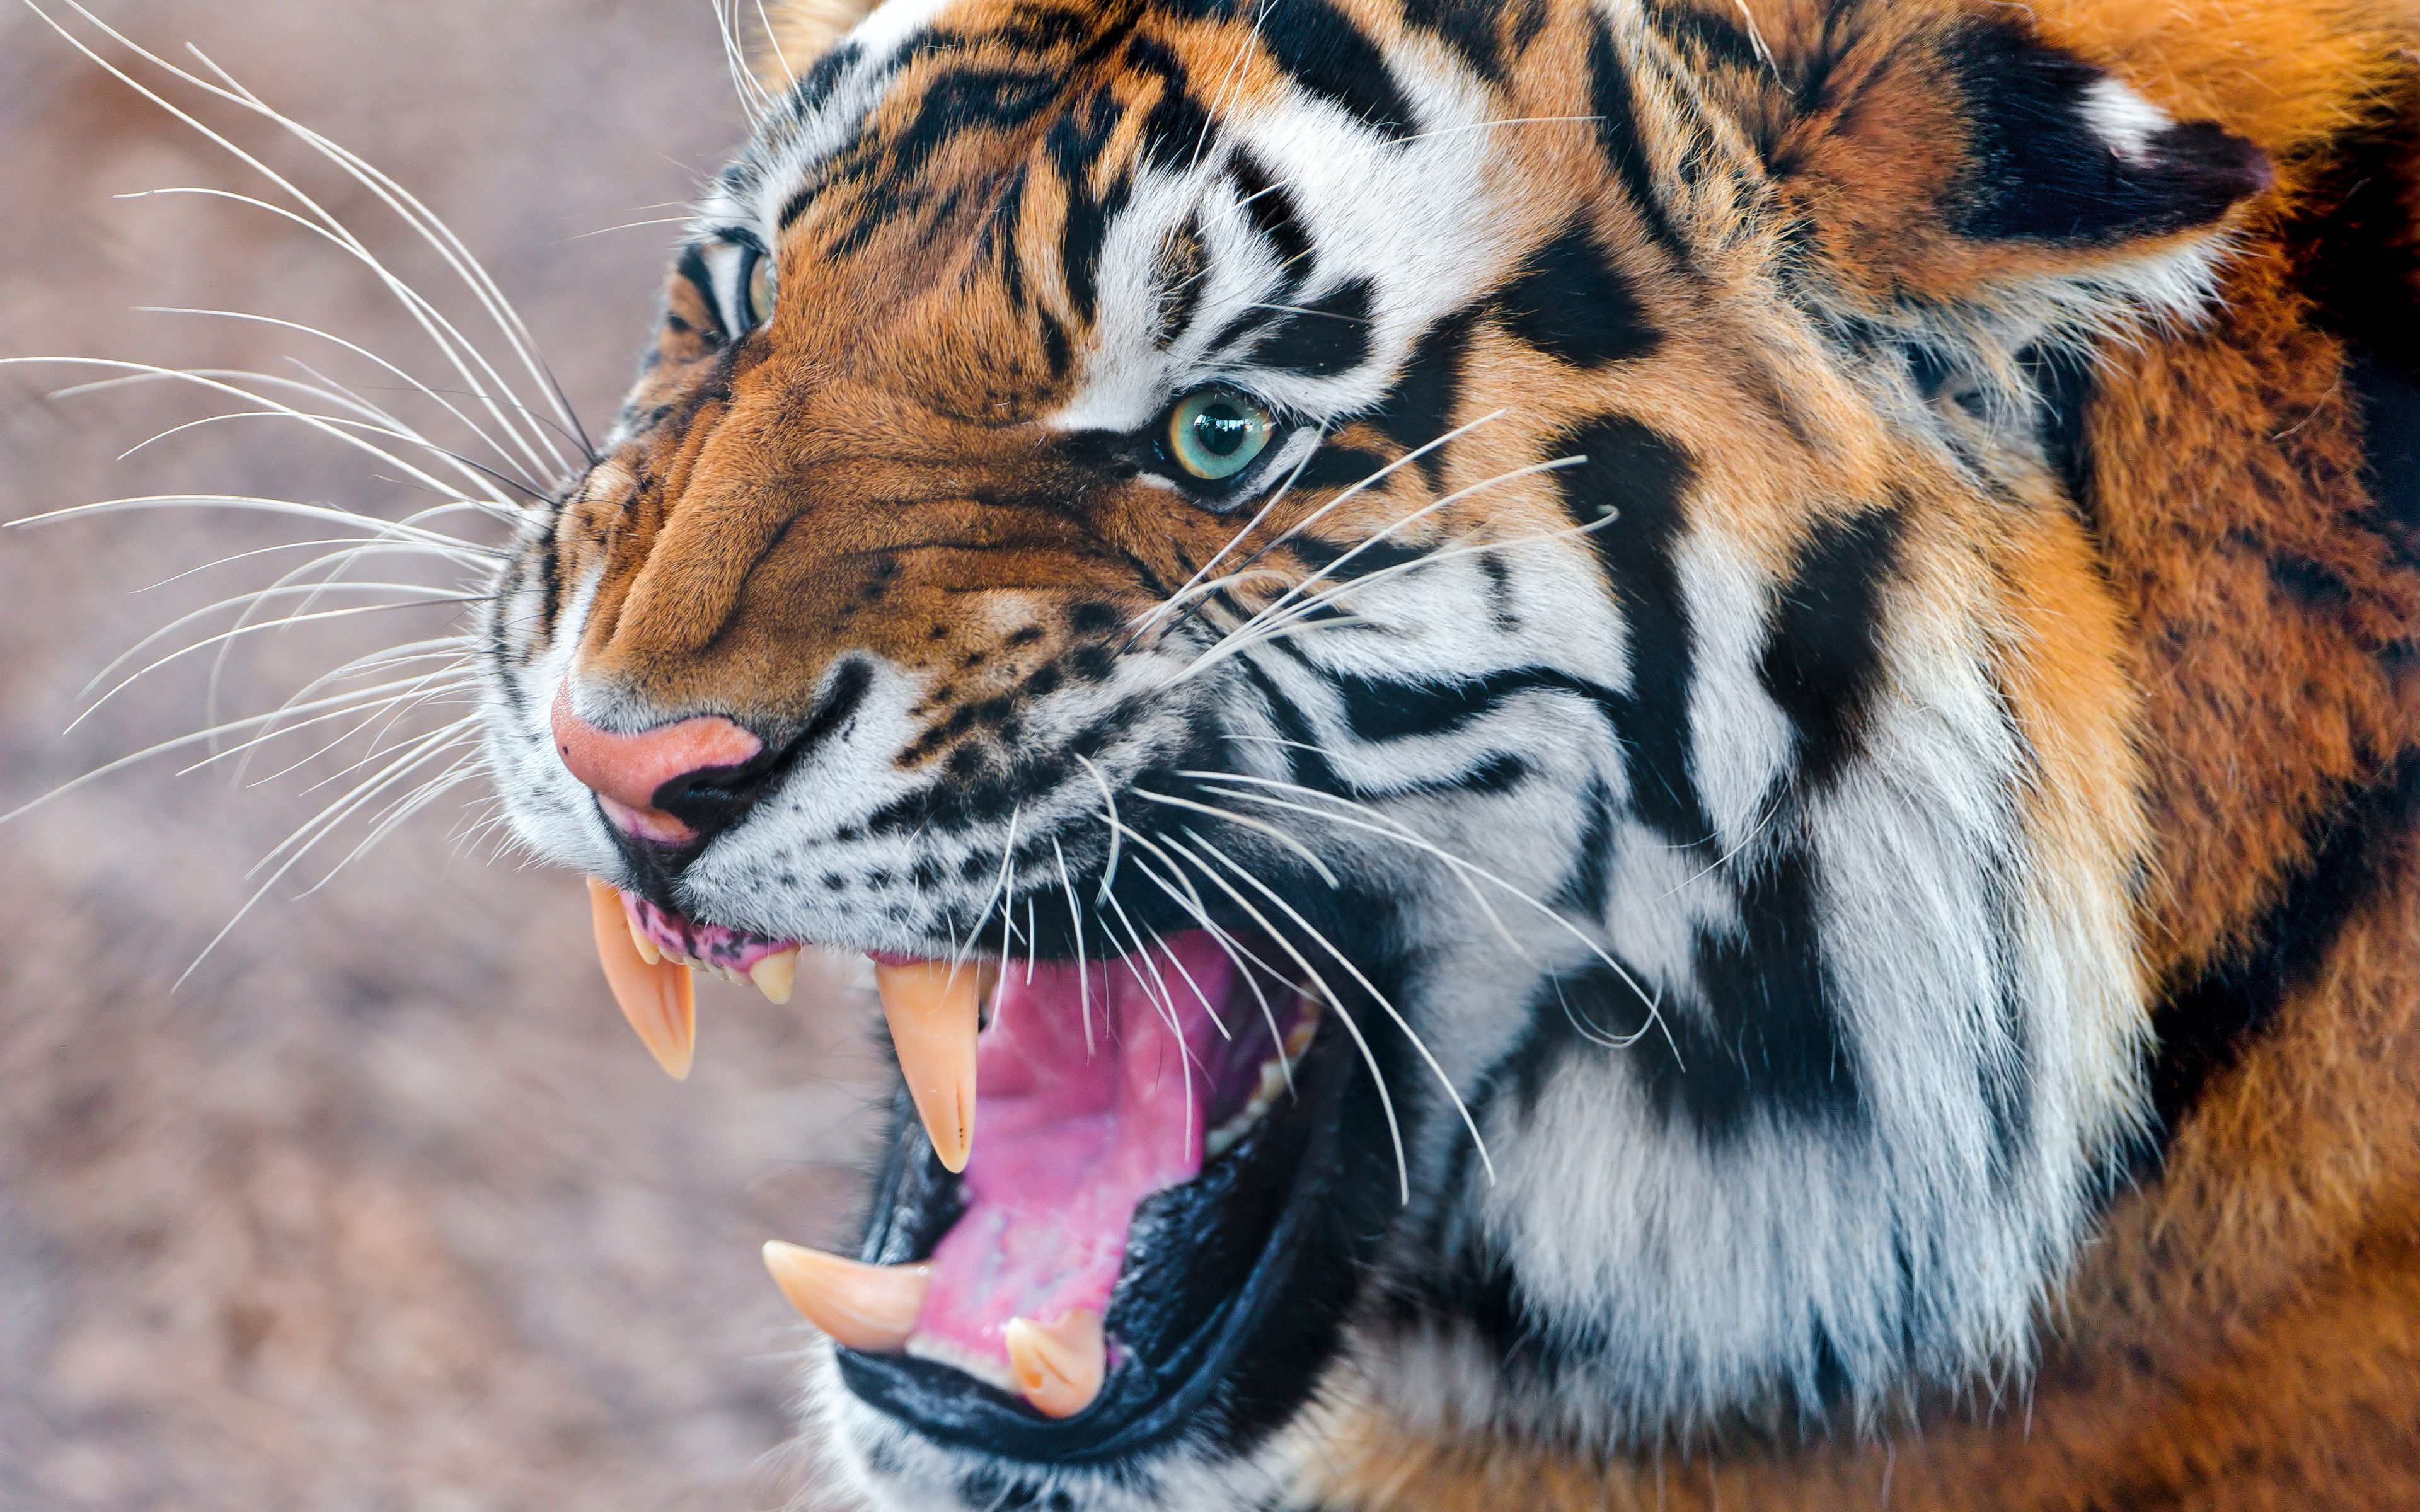 grin, tiger, animals, aggression, muzzle, anger lock screen backgrounds